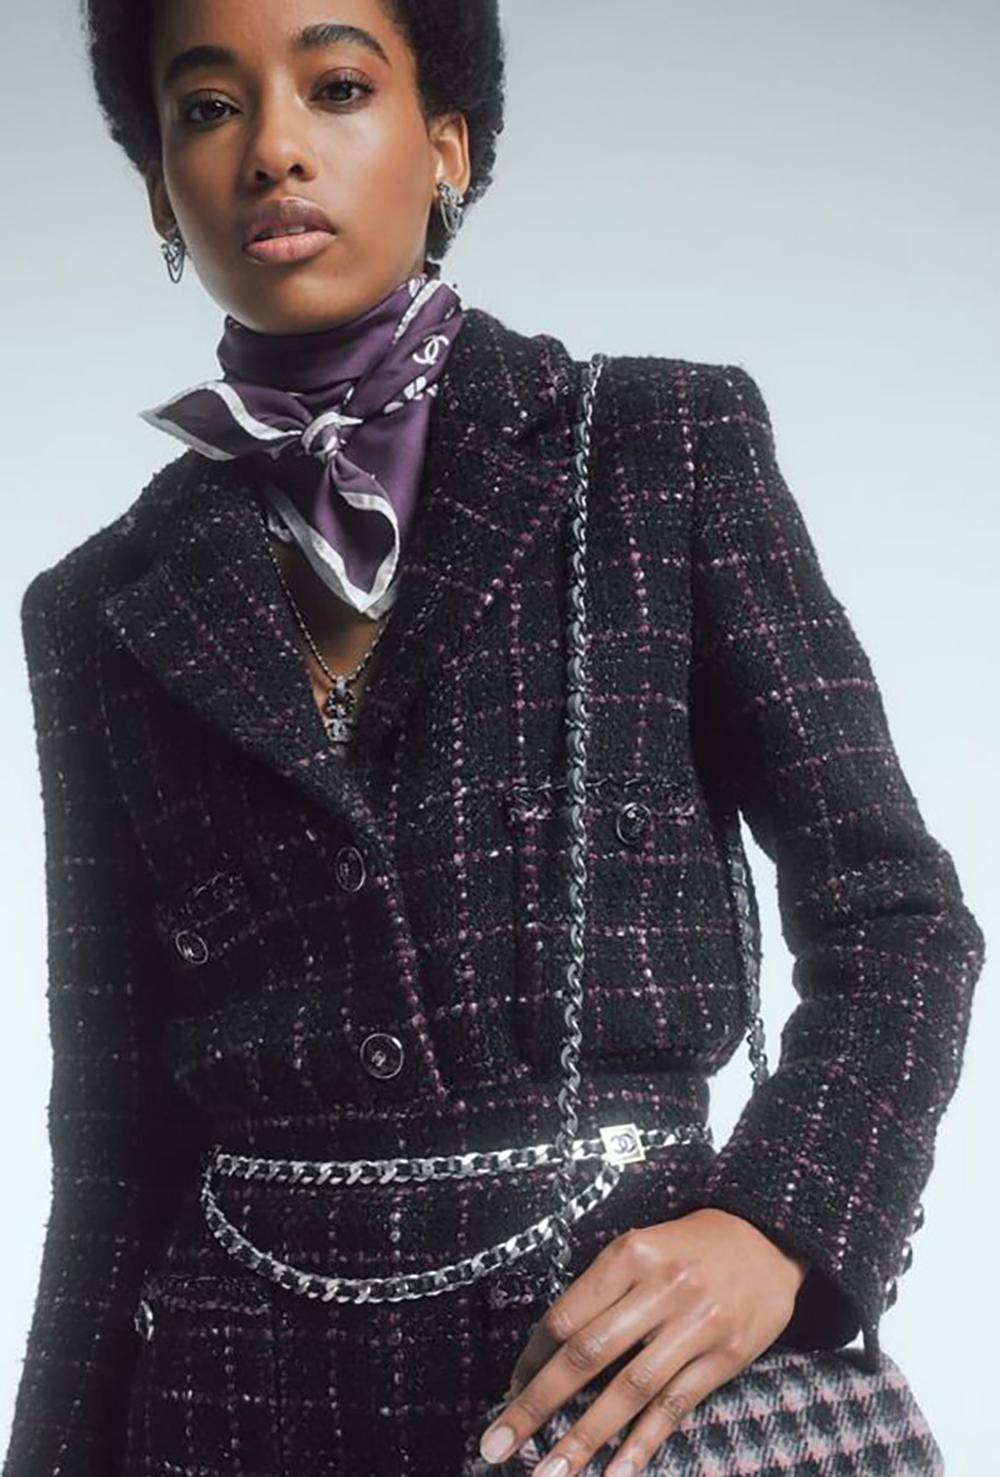 New iconic Chanel little black tweed jacket from Ad Campaign of 2021 Fall Pre Collection.
Absolutely classic, Timeless piece!
- CC logo sequin embellished buttons ar front, pockets and cuffs
- signature braided trim
- full silk lining, chain link at